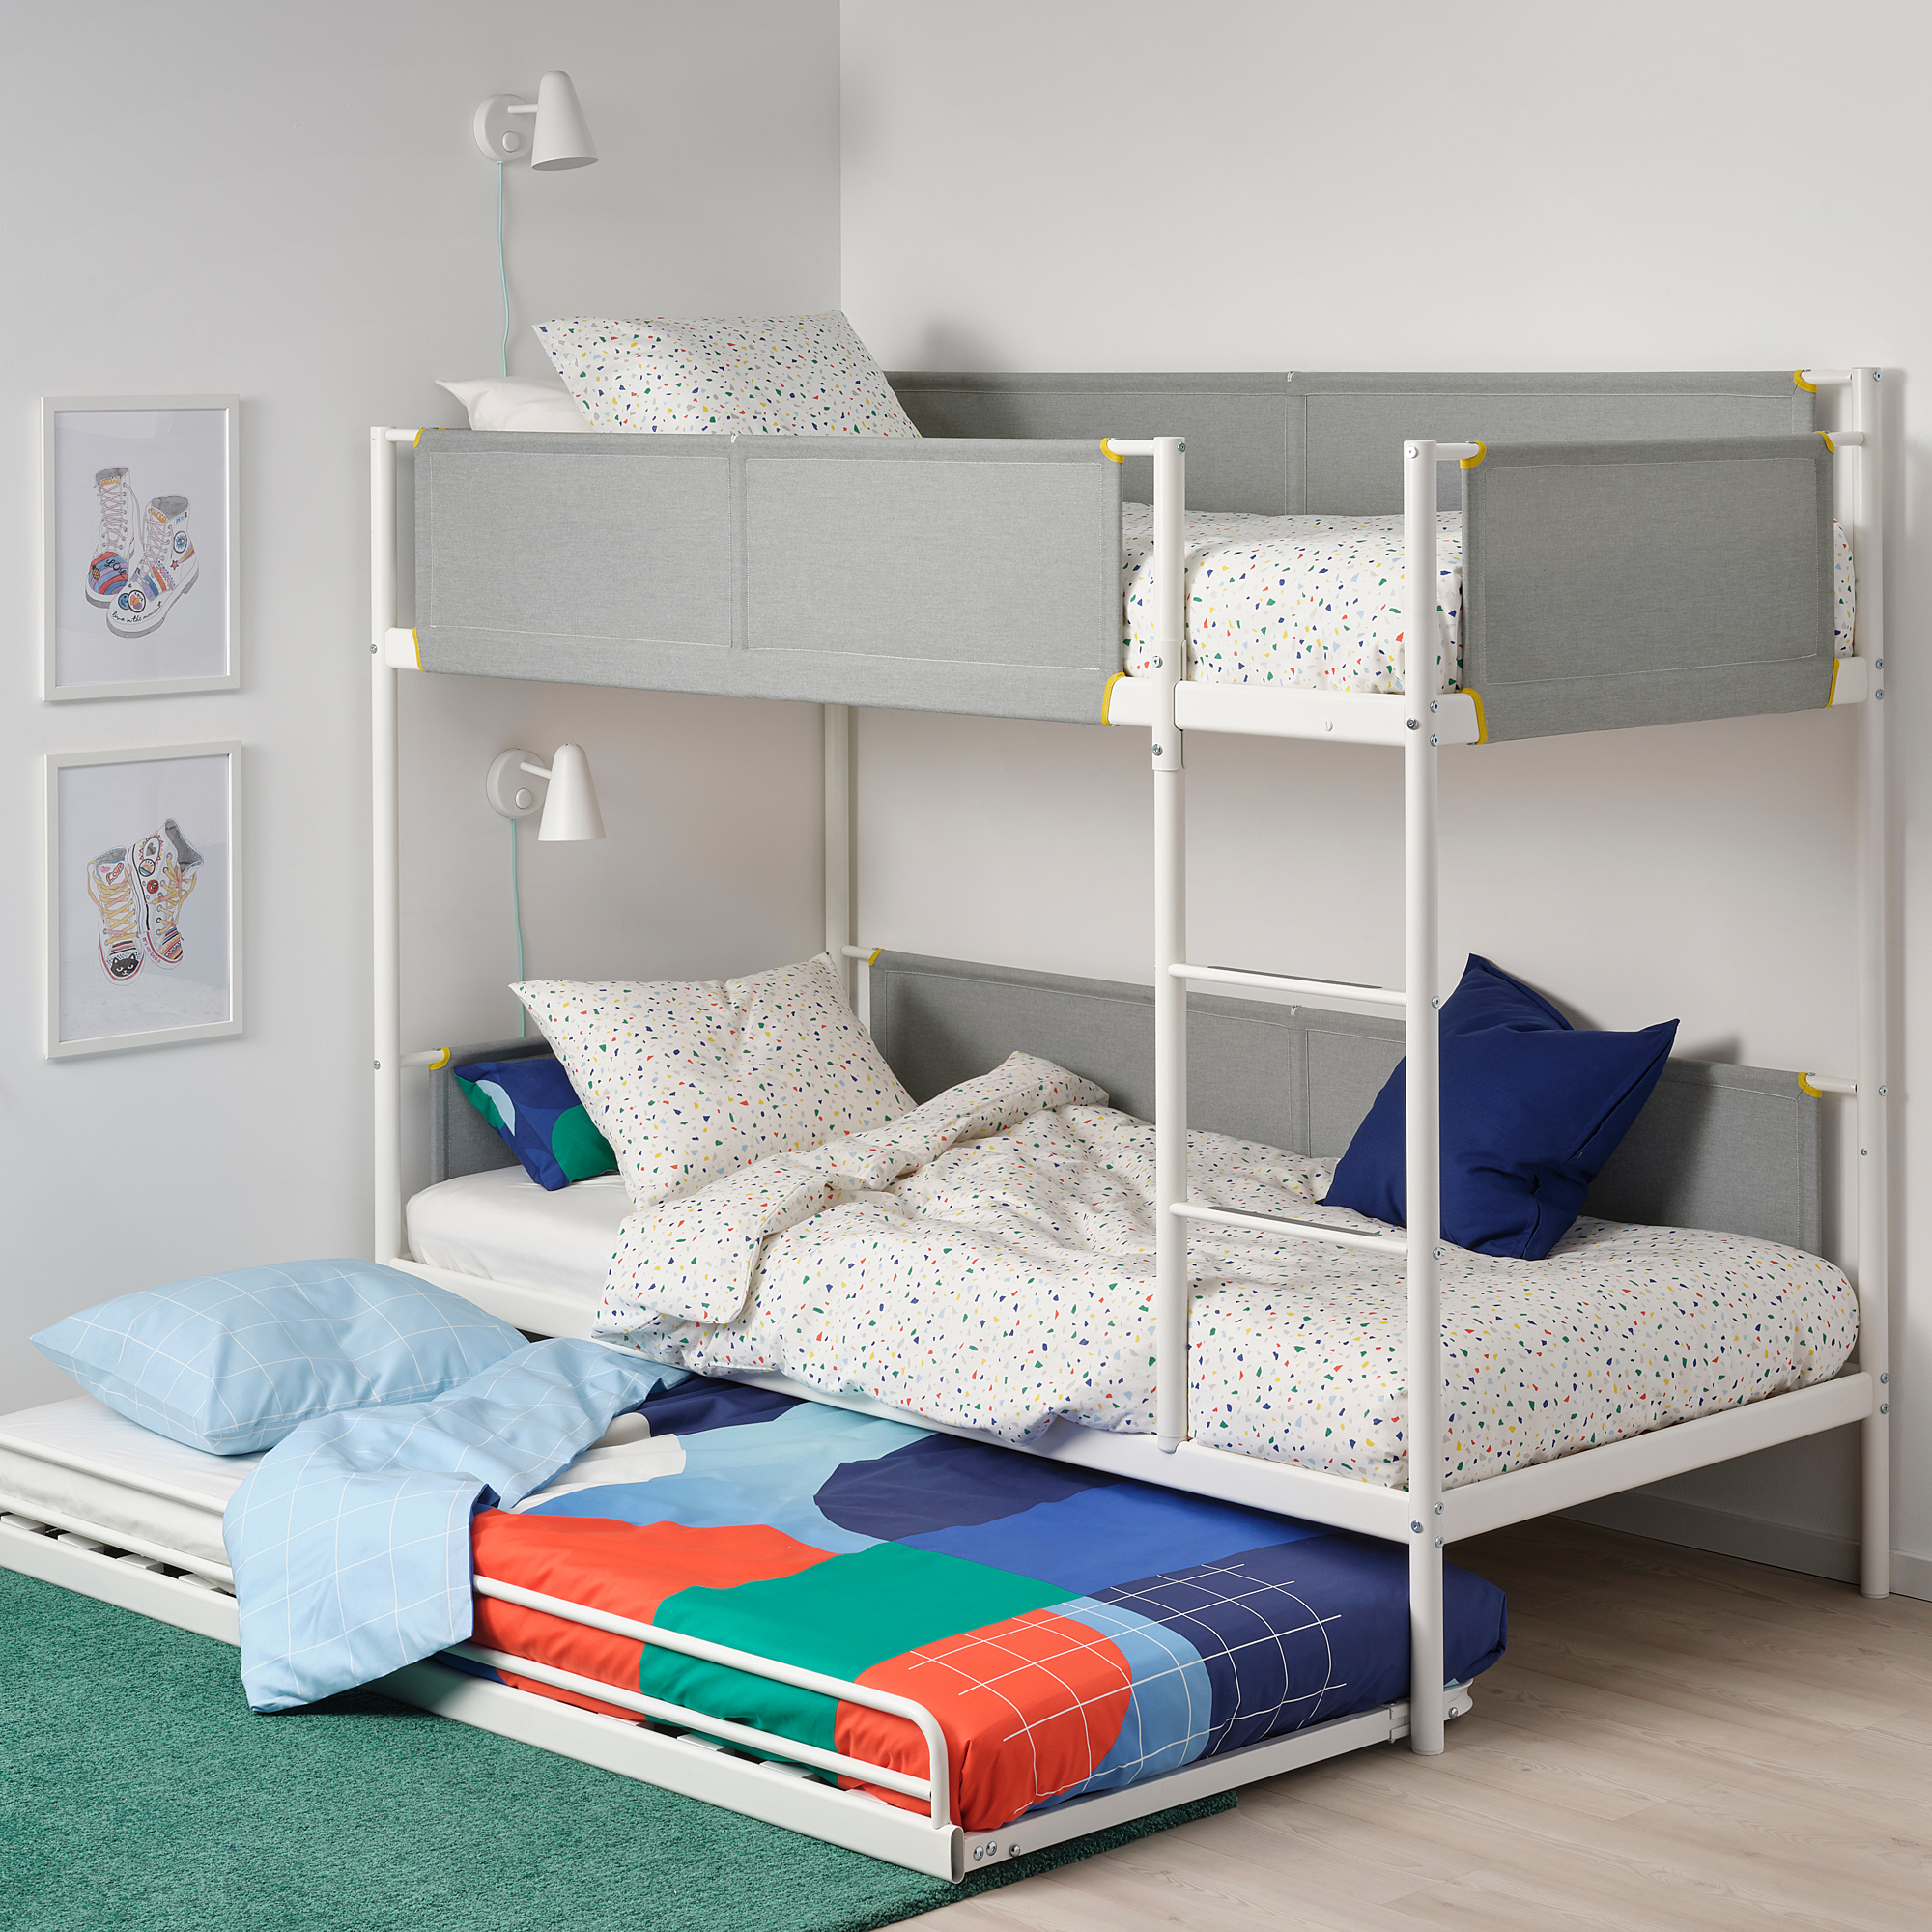 VITVAL bunk bed frame with underbed